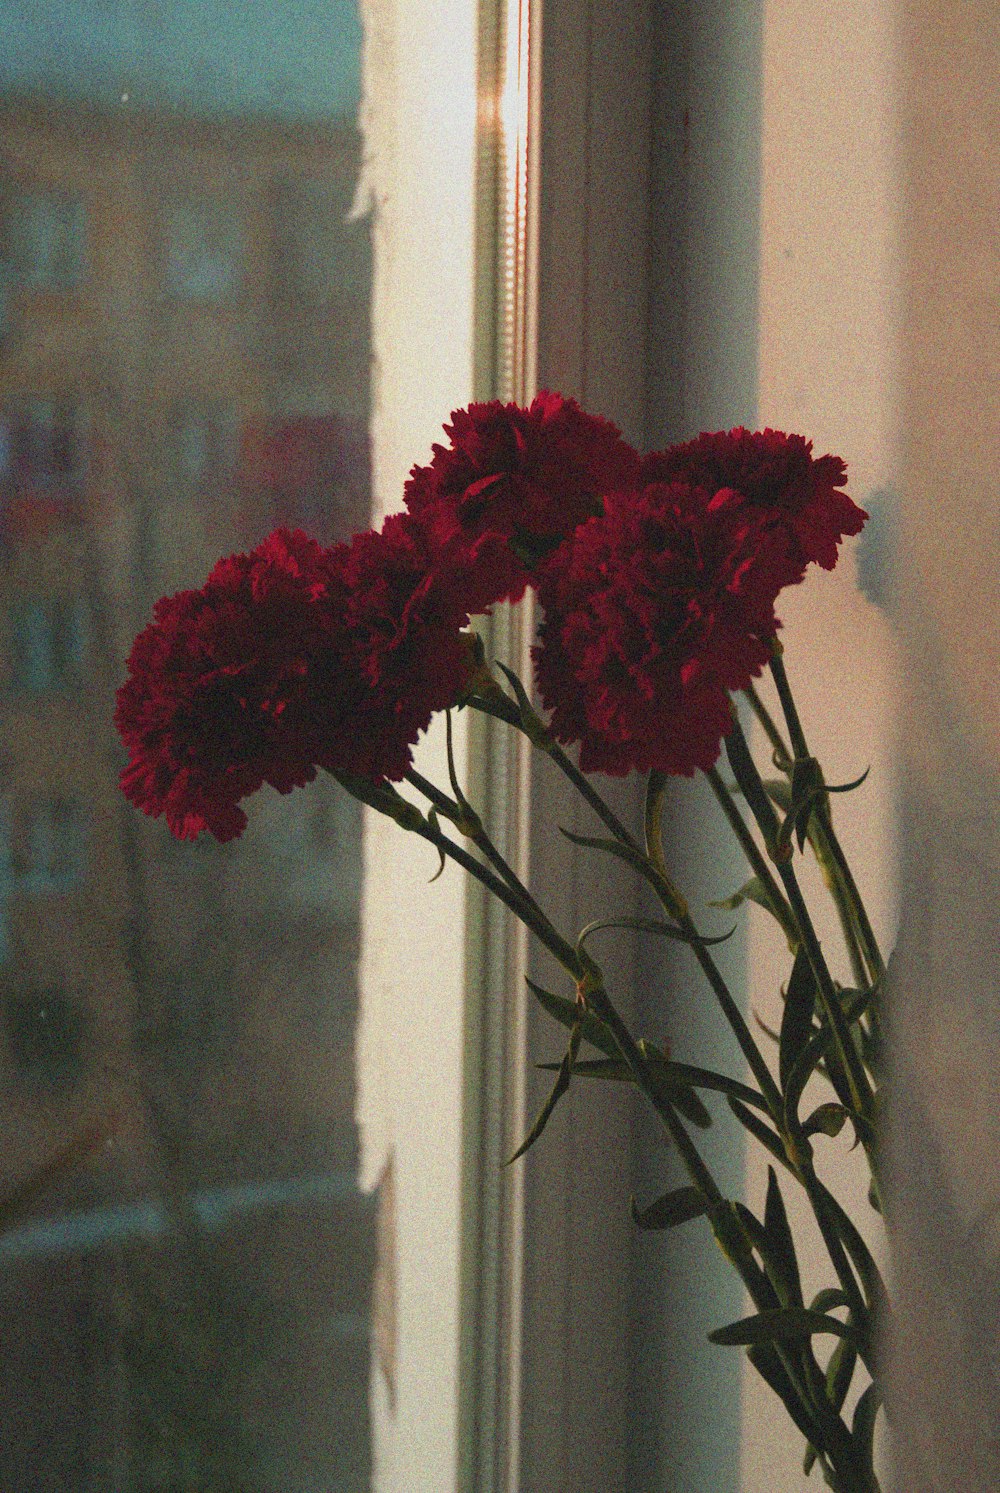 a bouquet of red carnations sitting in front of a window